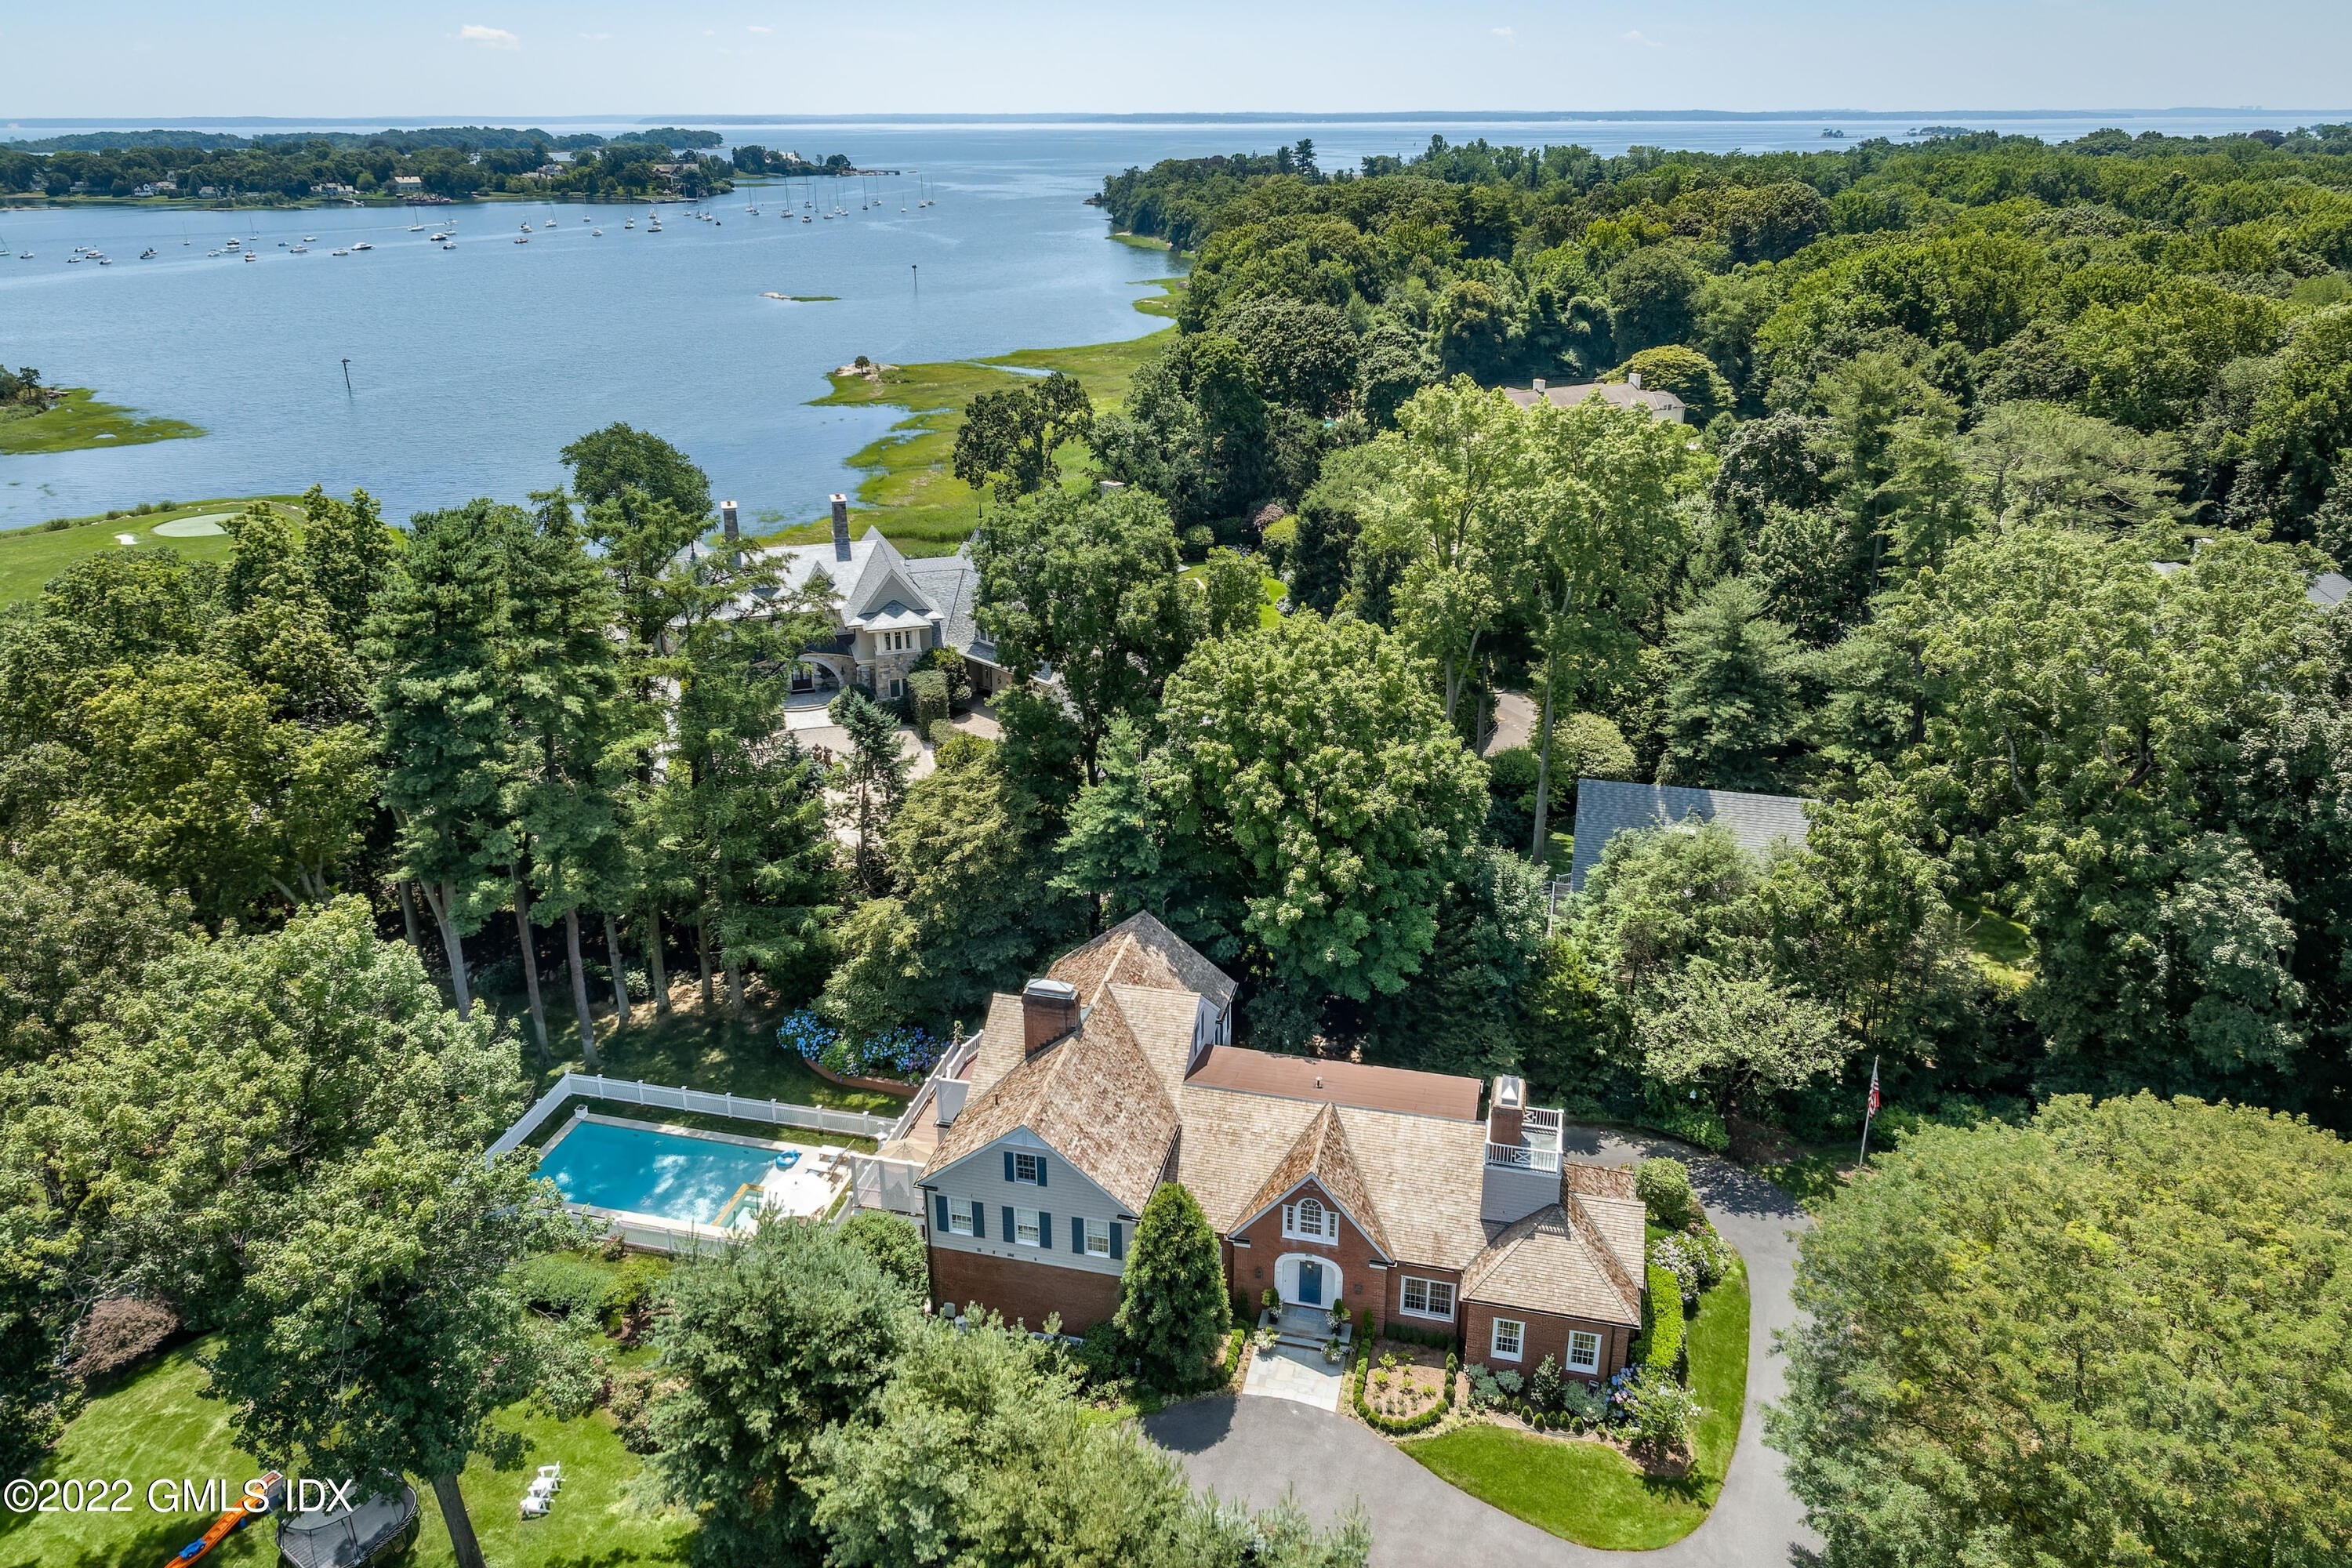 Property at Indian Harbor, Greenwich, Connecticut 06830